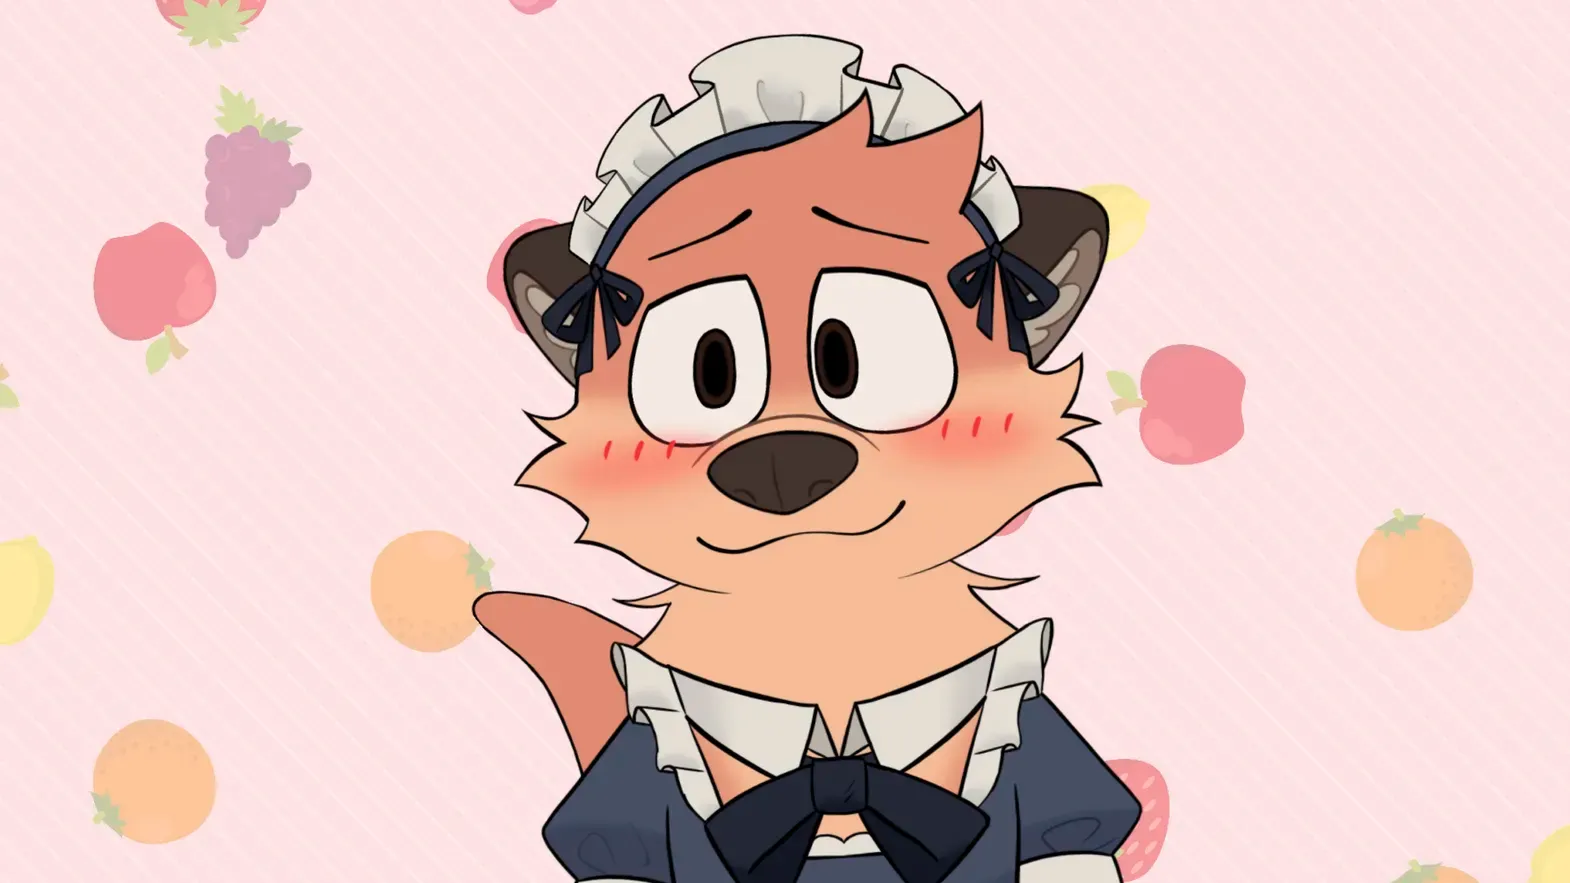 'Chester the Otter', a Vtuber avatar, depicted as an anthropomorphic otter in a maid outfit. Chester's fur is a blend of orange and white, with prominent, round eyes, and a small, endearing snout. The avatar is dressed in a traditional maid outfit with a dark blue sailor collar and a matching large bow, while blue ribbons adorn the ears. The background is a playful pink with a fruity pattern, enhancing the character's charming appeal.